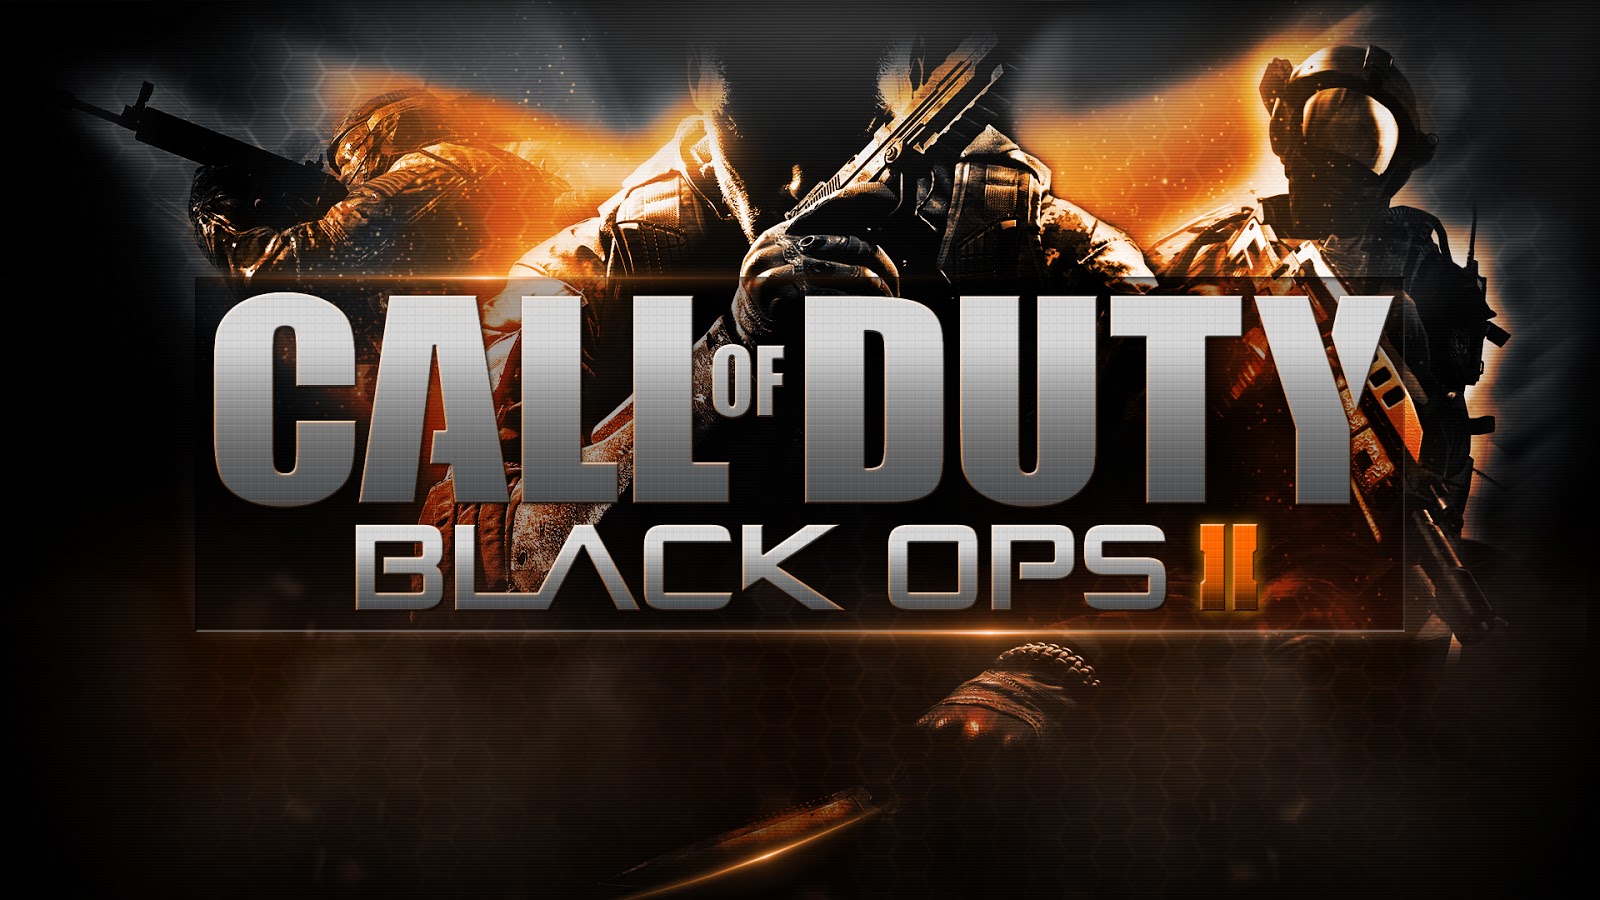 HD WALLPAPERS Call of Duty Black ops 2 HD Backgrounds